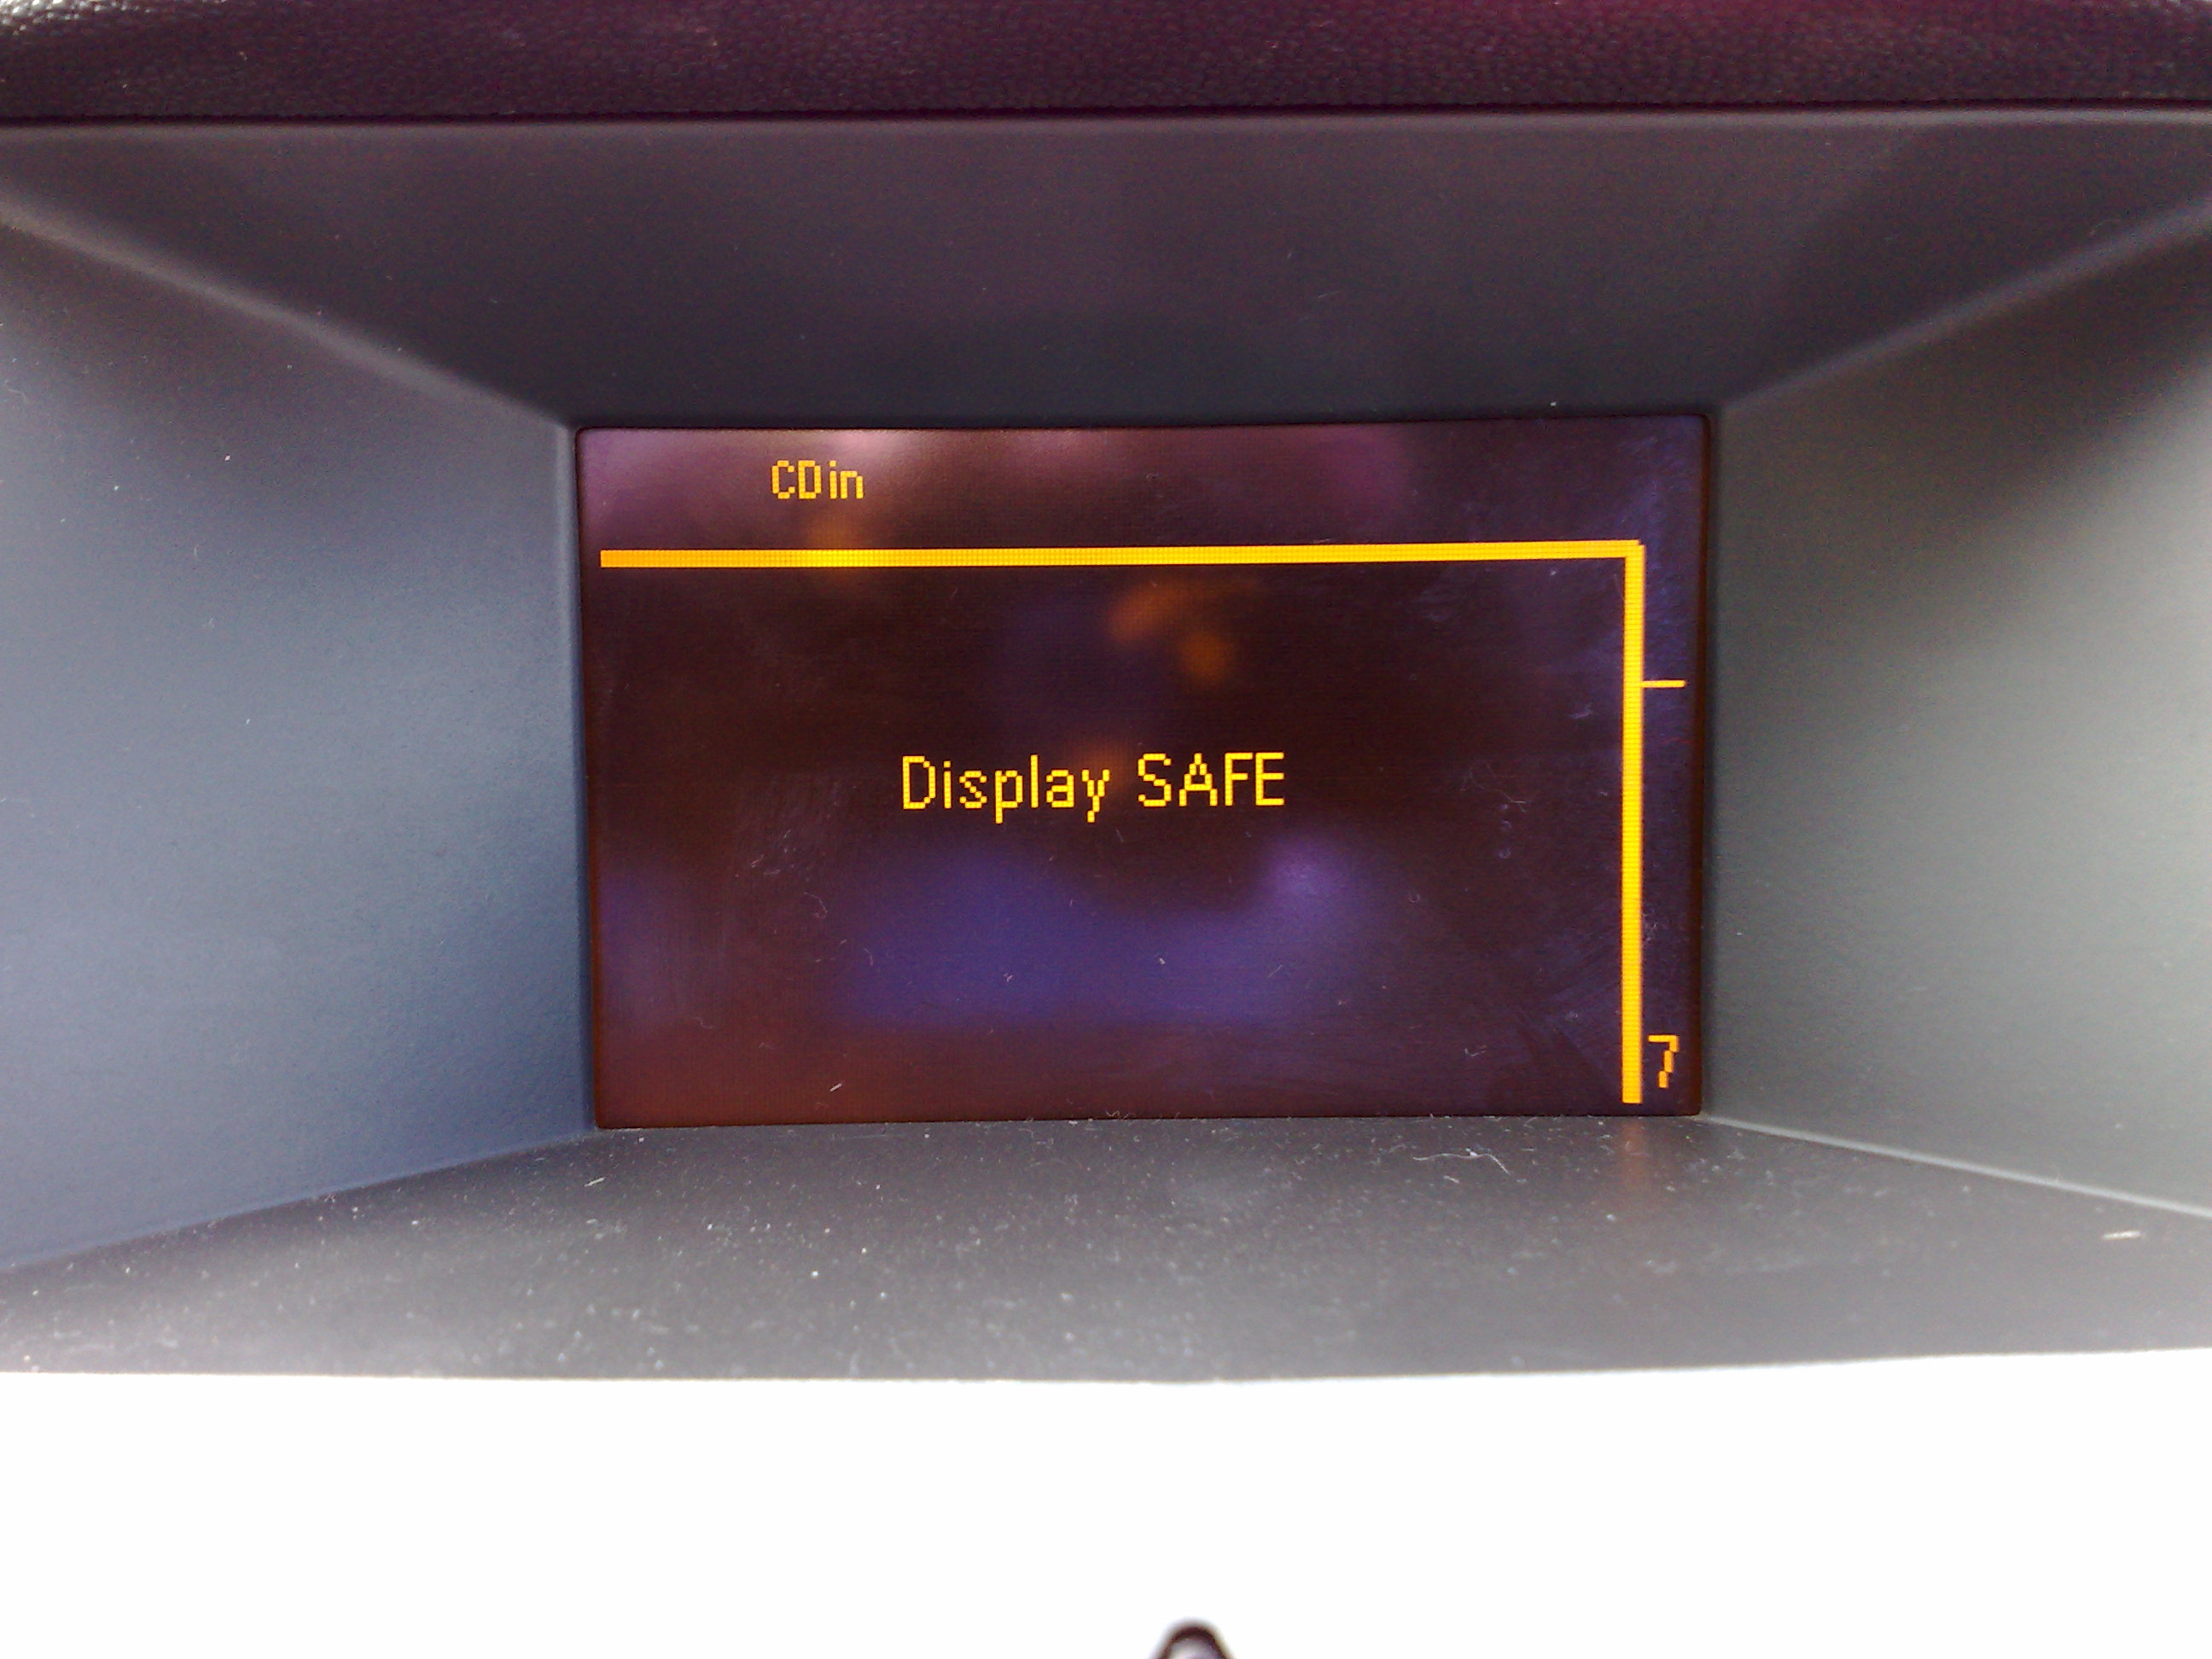 Opel Astra h 2007 I have an opel Astra H 2007 5 doors, I ahve changed the display LCD monitor with another one but I have the following message in the screen "Display SAFE" is there any code? or what to do